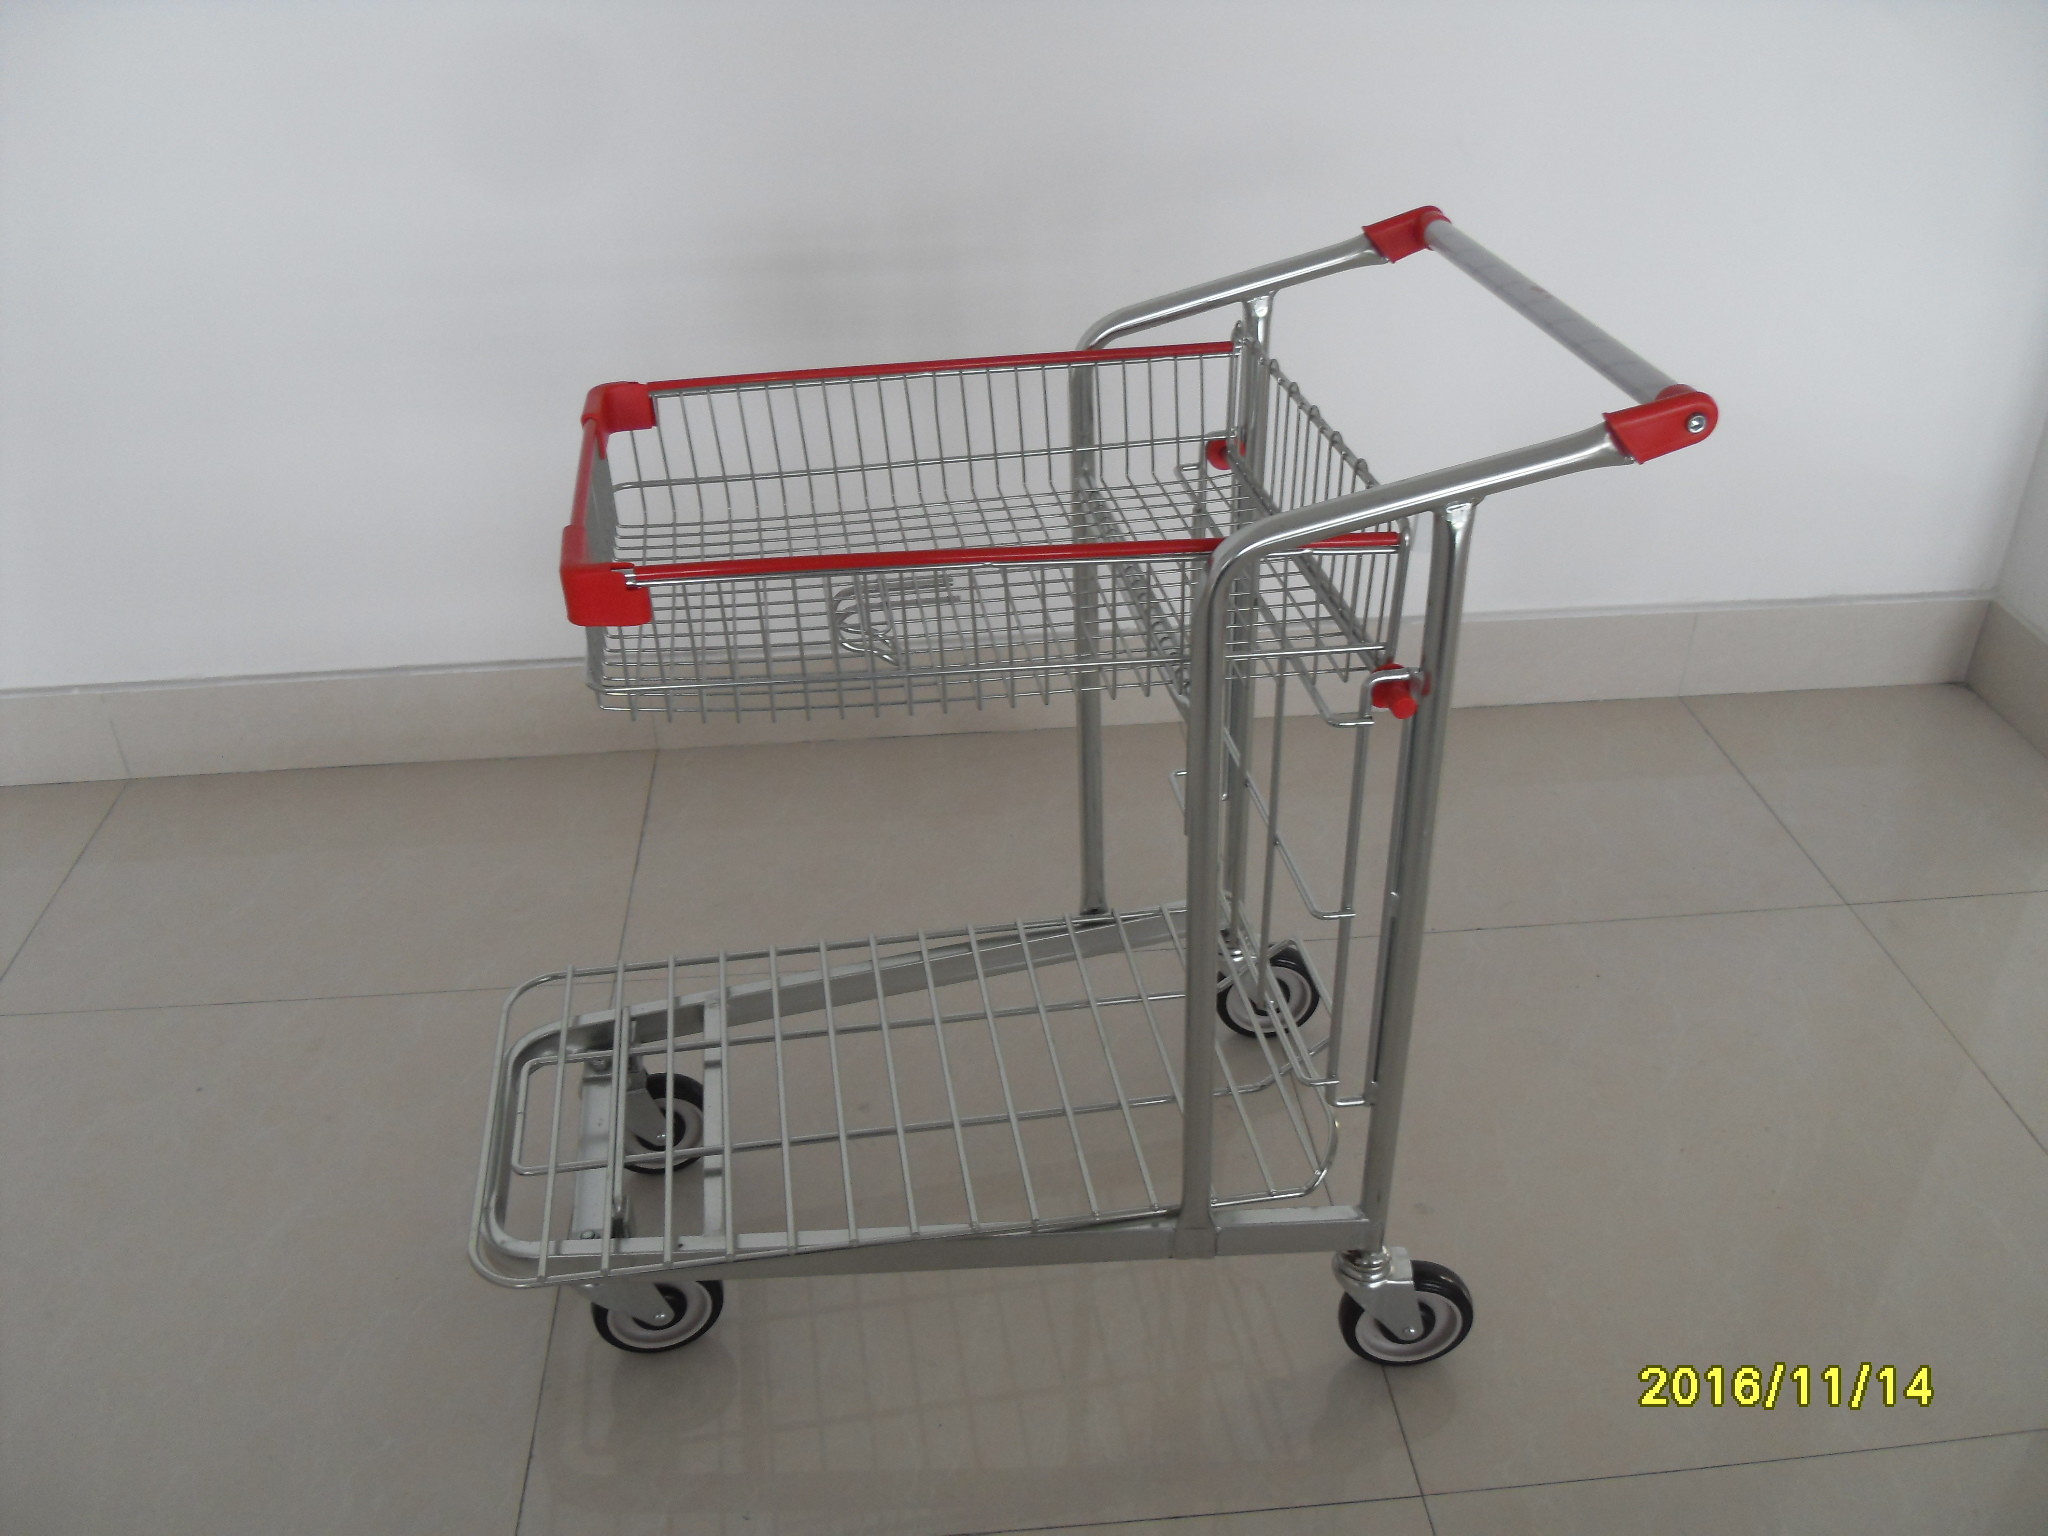 Steel Tube Material Warehouse Trolley With Handle Logo Printing And 4 Swivel Flat 5 Inch TAPE Casters